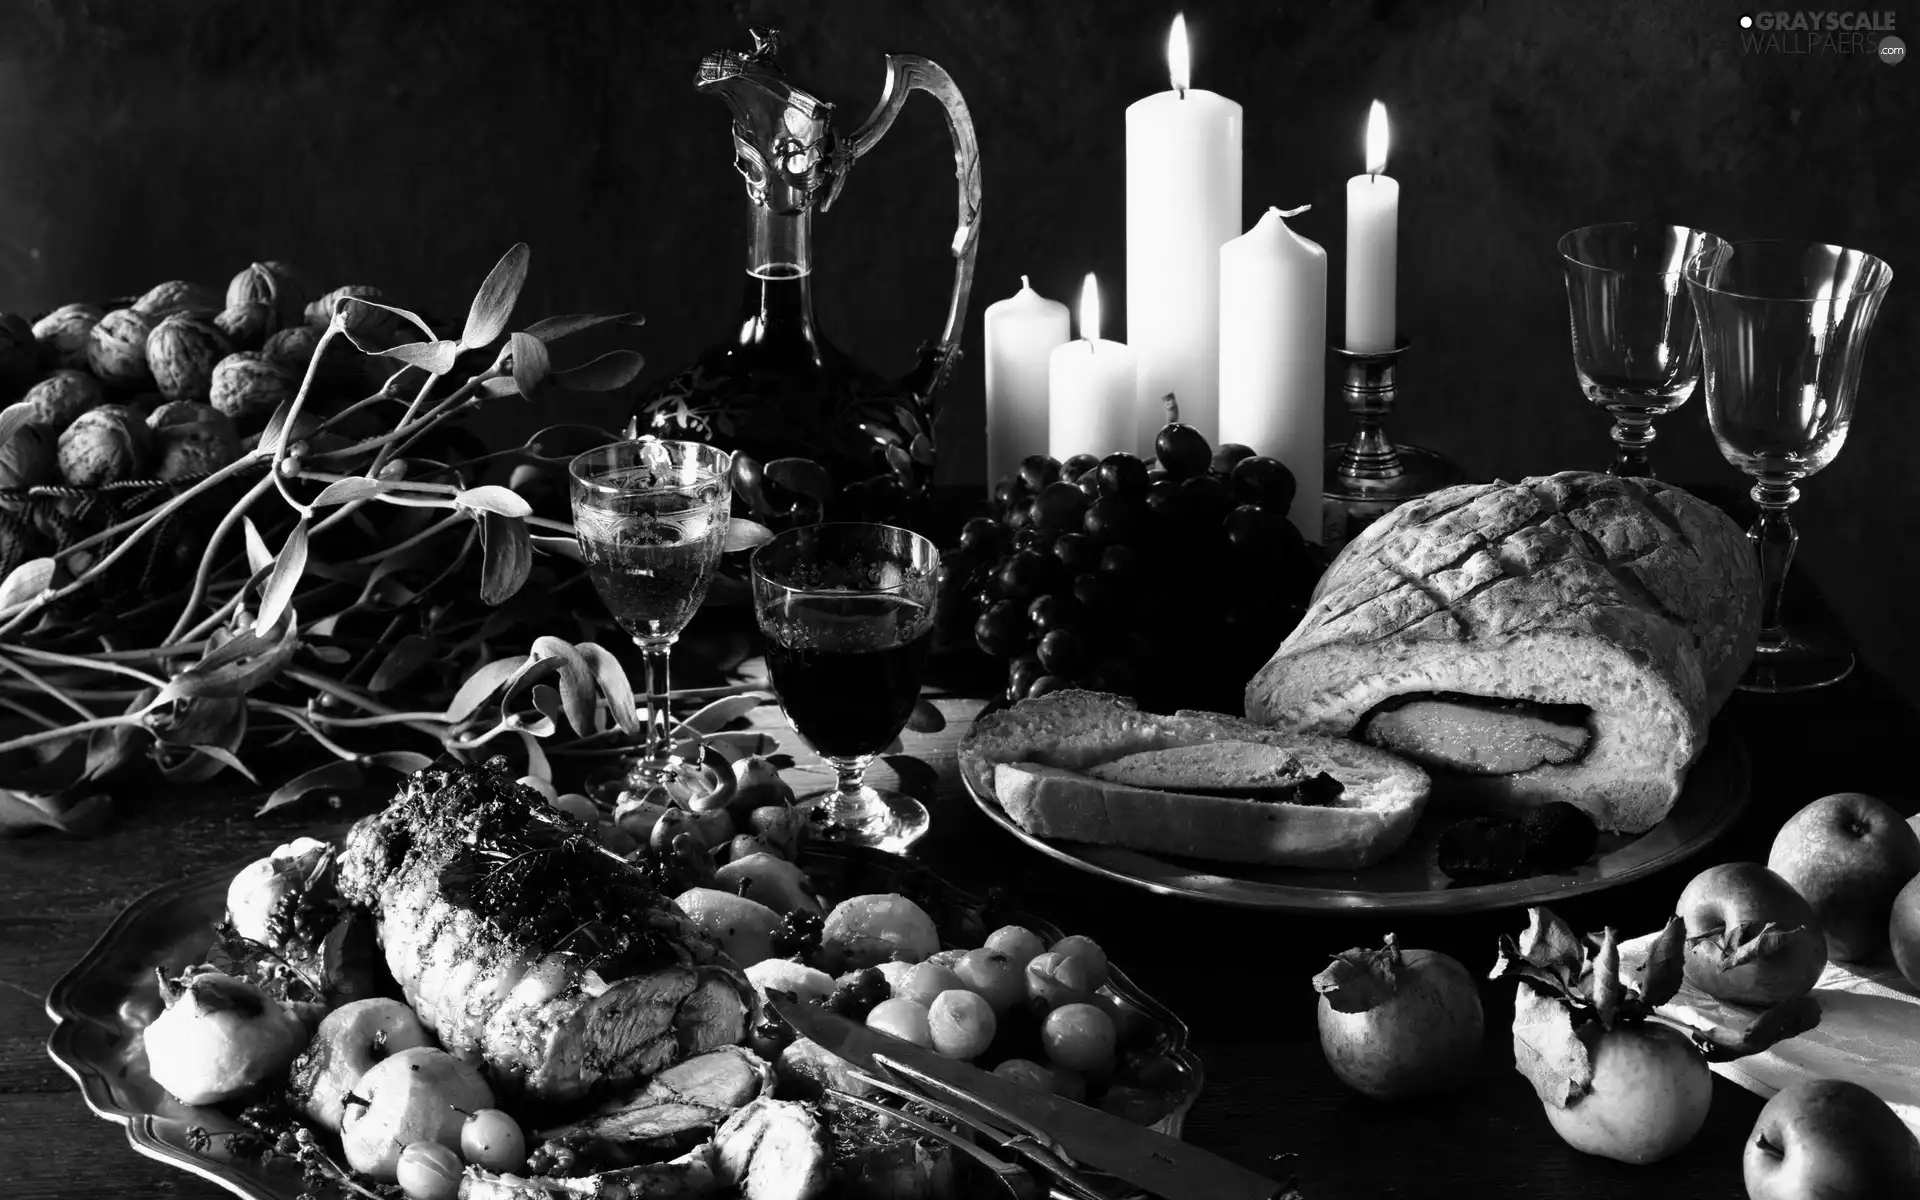 potatoes, apples, nuts, Wine, Candles, meat, baked, White